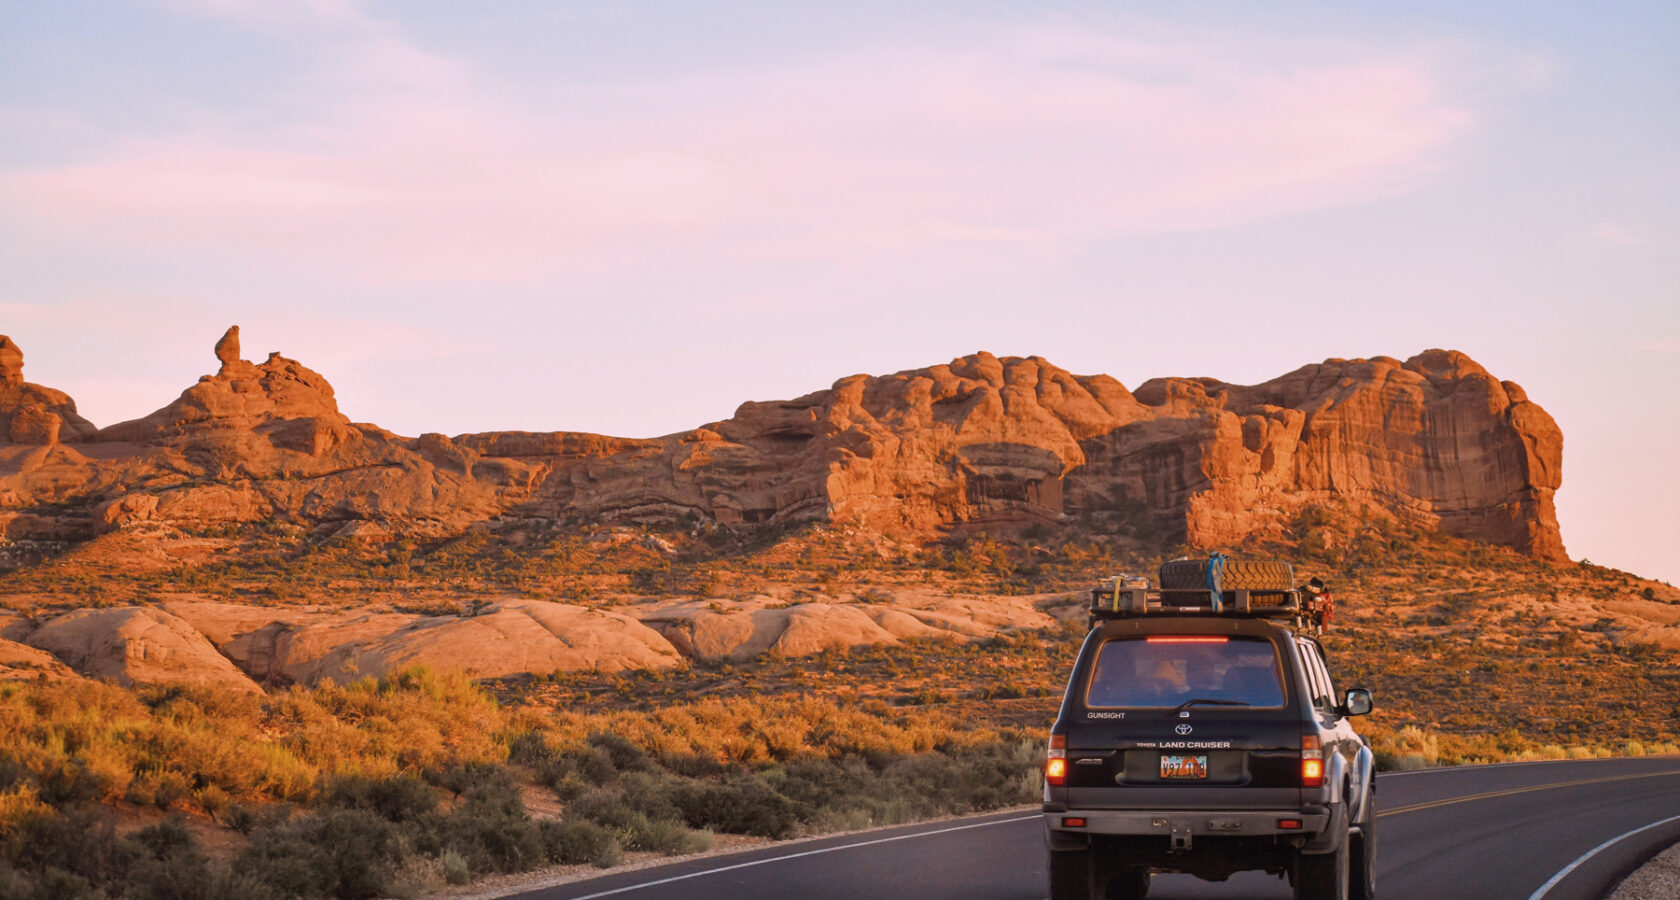 6 Essential Tips for a Stress-free Road Trip